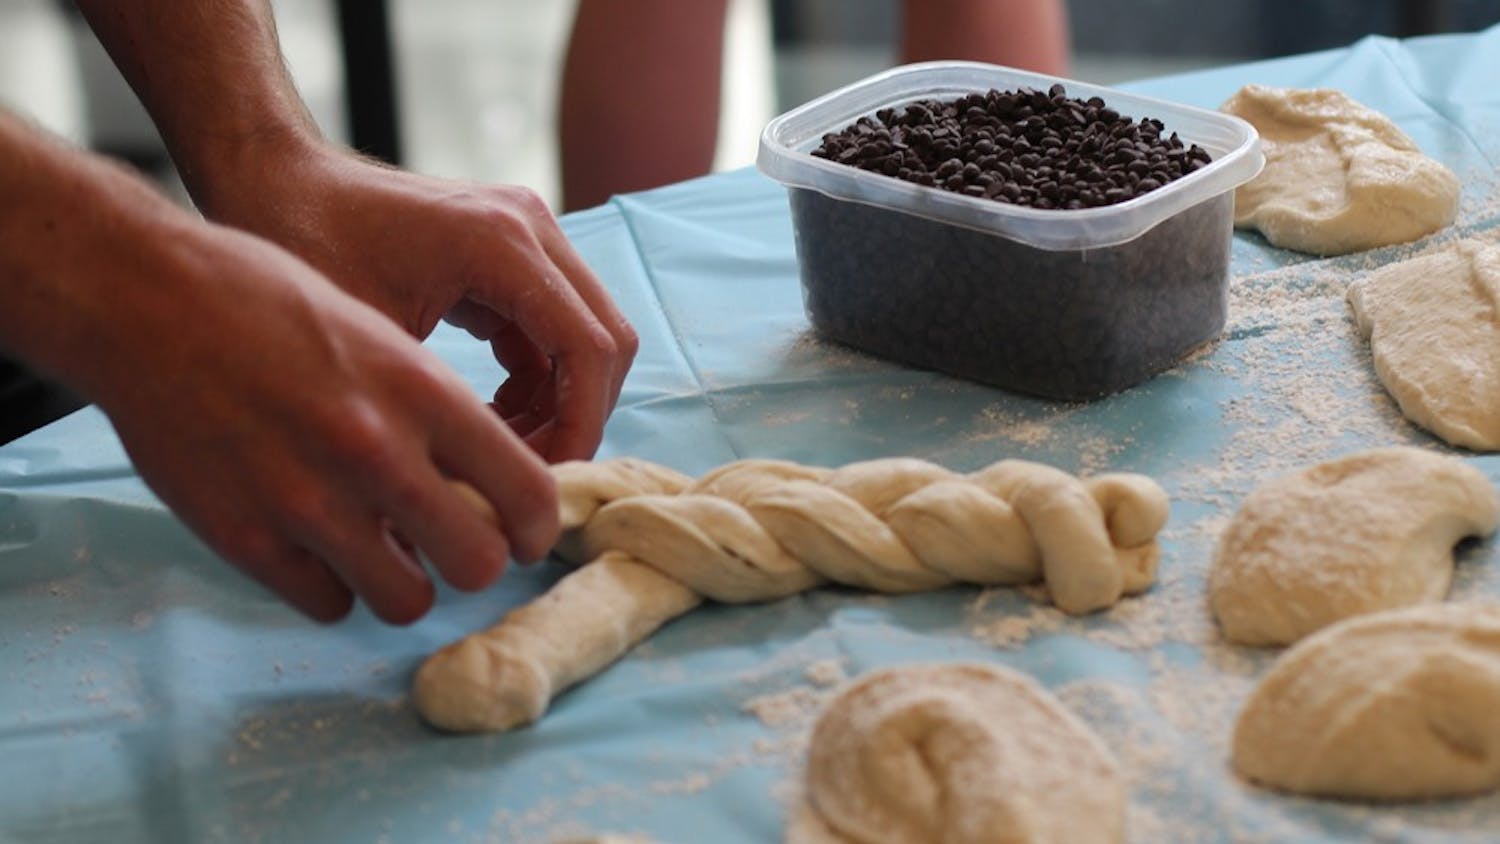 Students weave dough for the Challah for Hunger bake sale. Challah is a traditional Jewish bread eaten on Sabbath and holidays. 